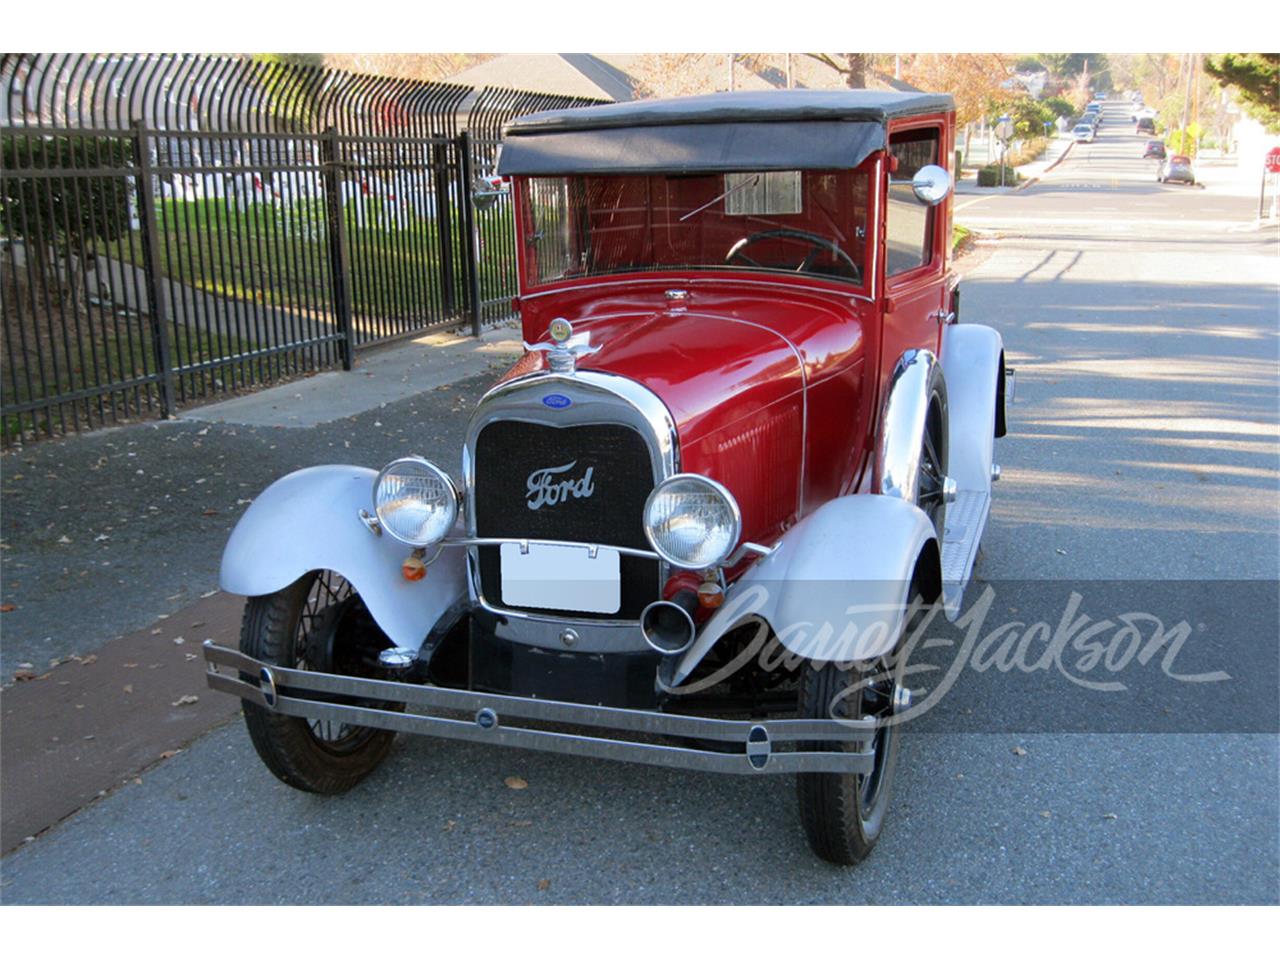 For Sale at Auction: 1929 Ford Model A in Scottsdale, Arizona for sale in Scottsdale, AZ